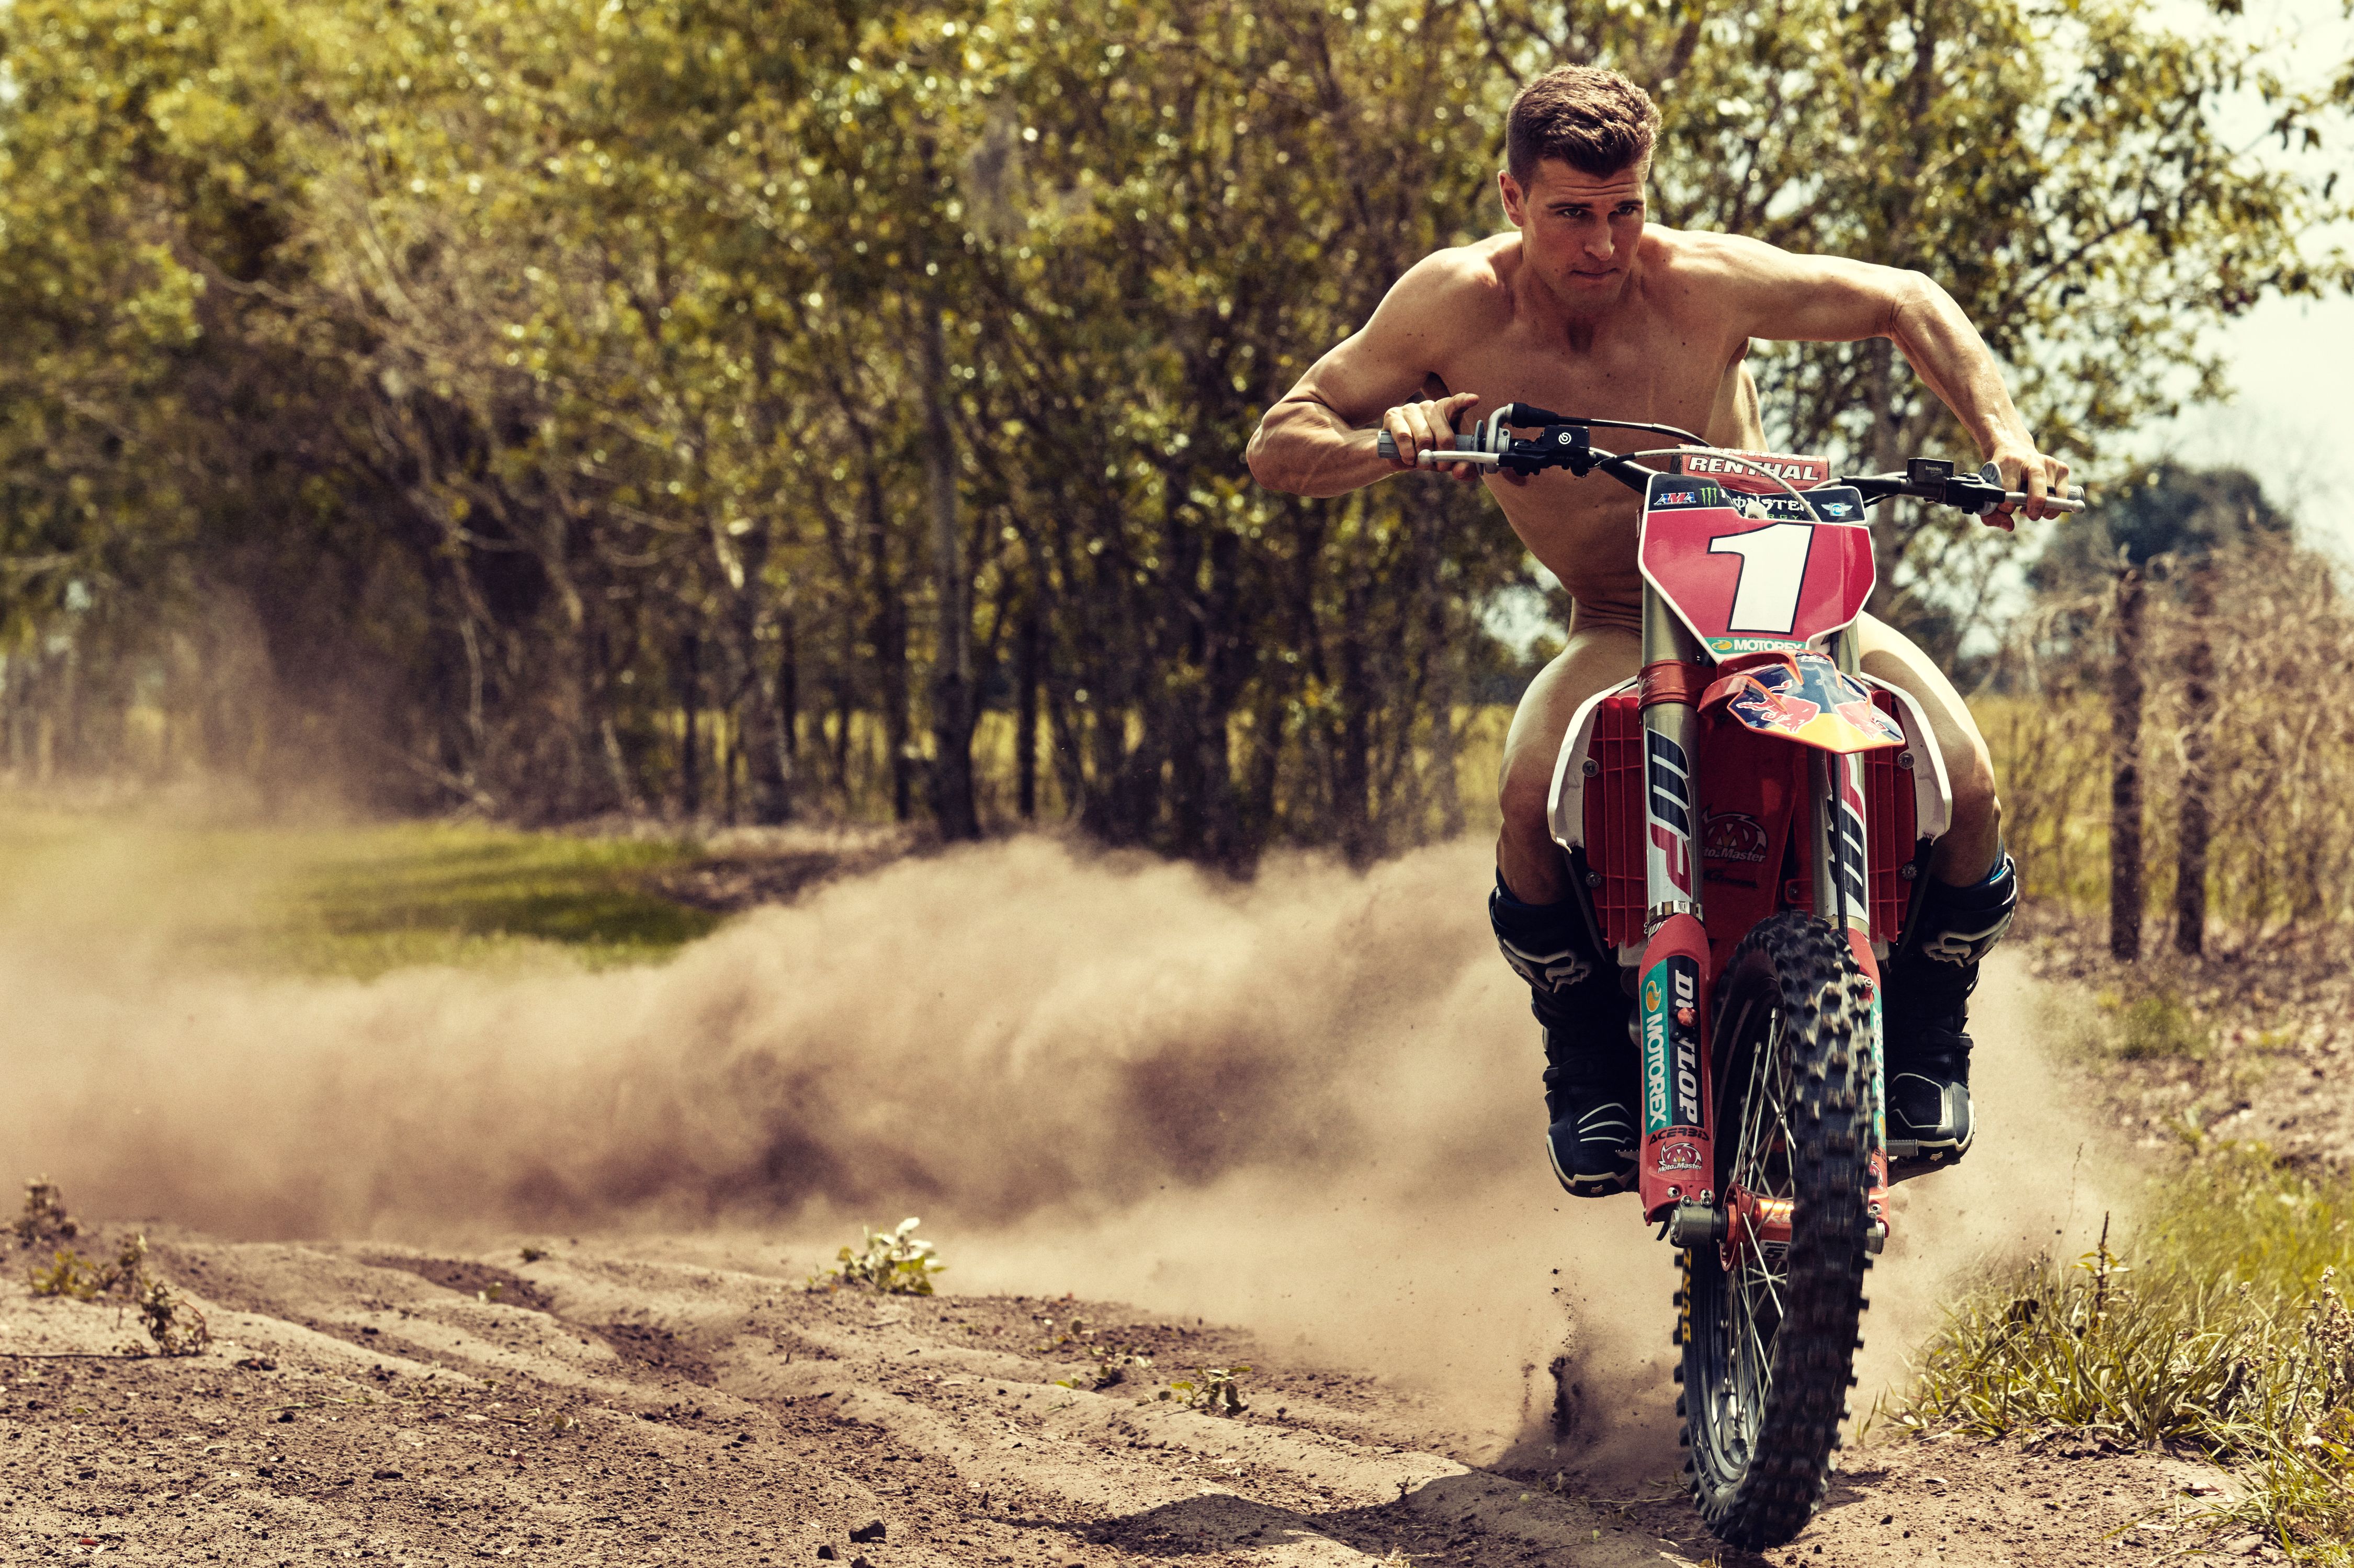 Eight-time AMA motocross champion Ryan Dungey is not afraid of hurtling thr...